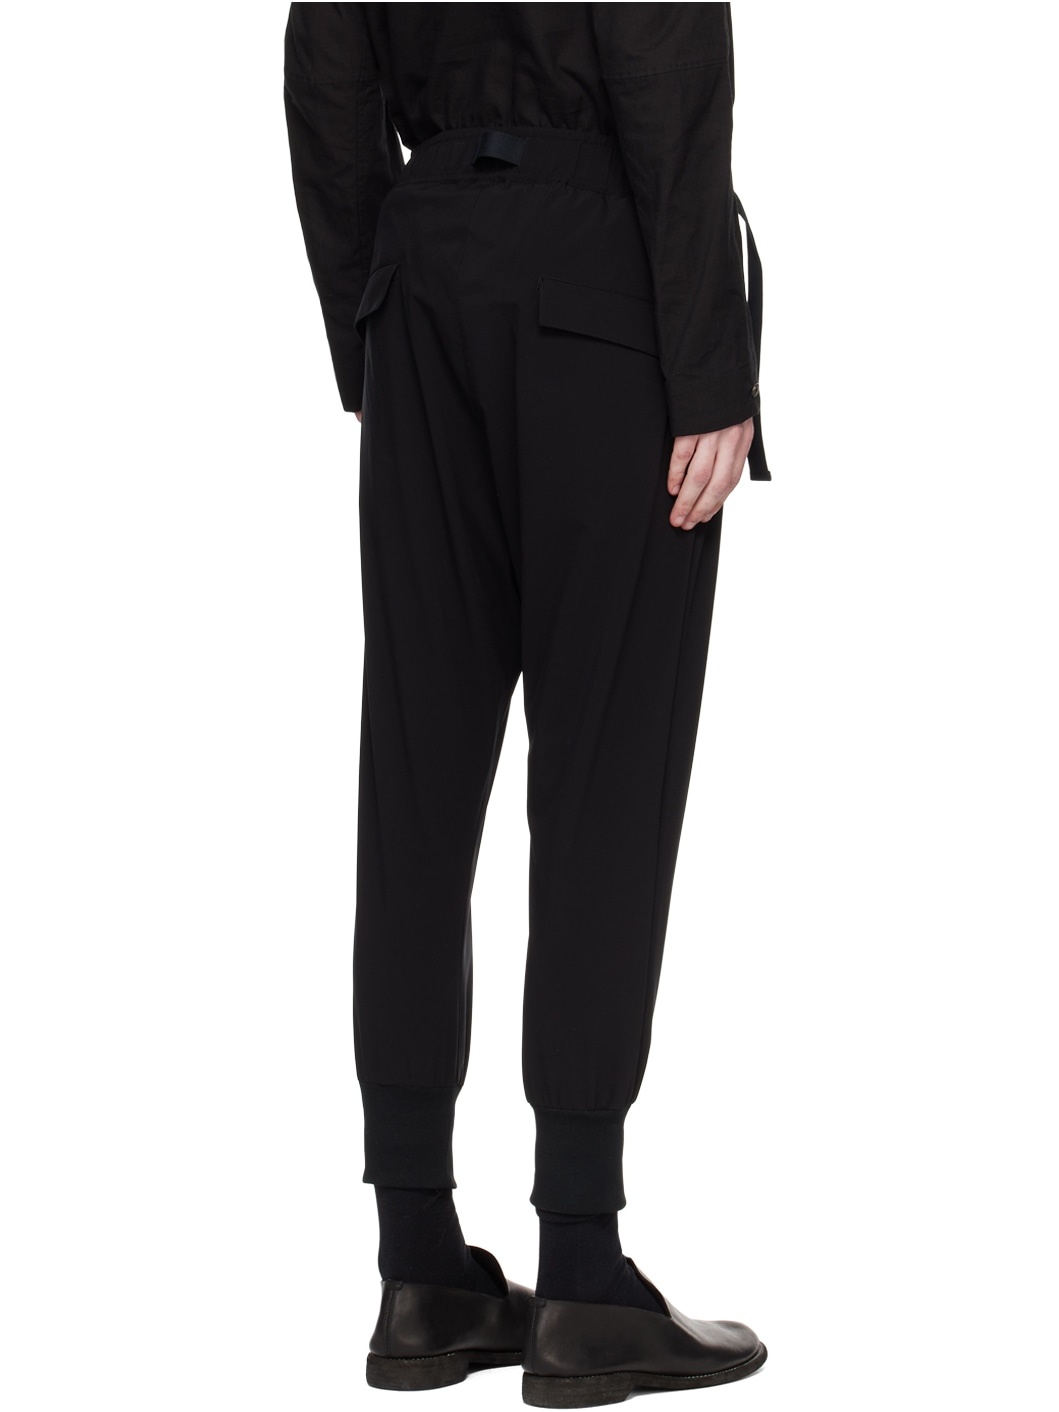 Black Water-Repellent Trousers - 3